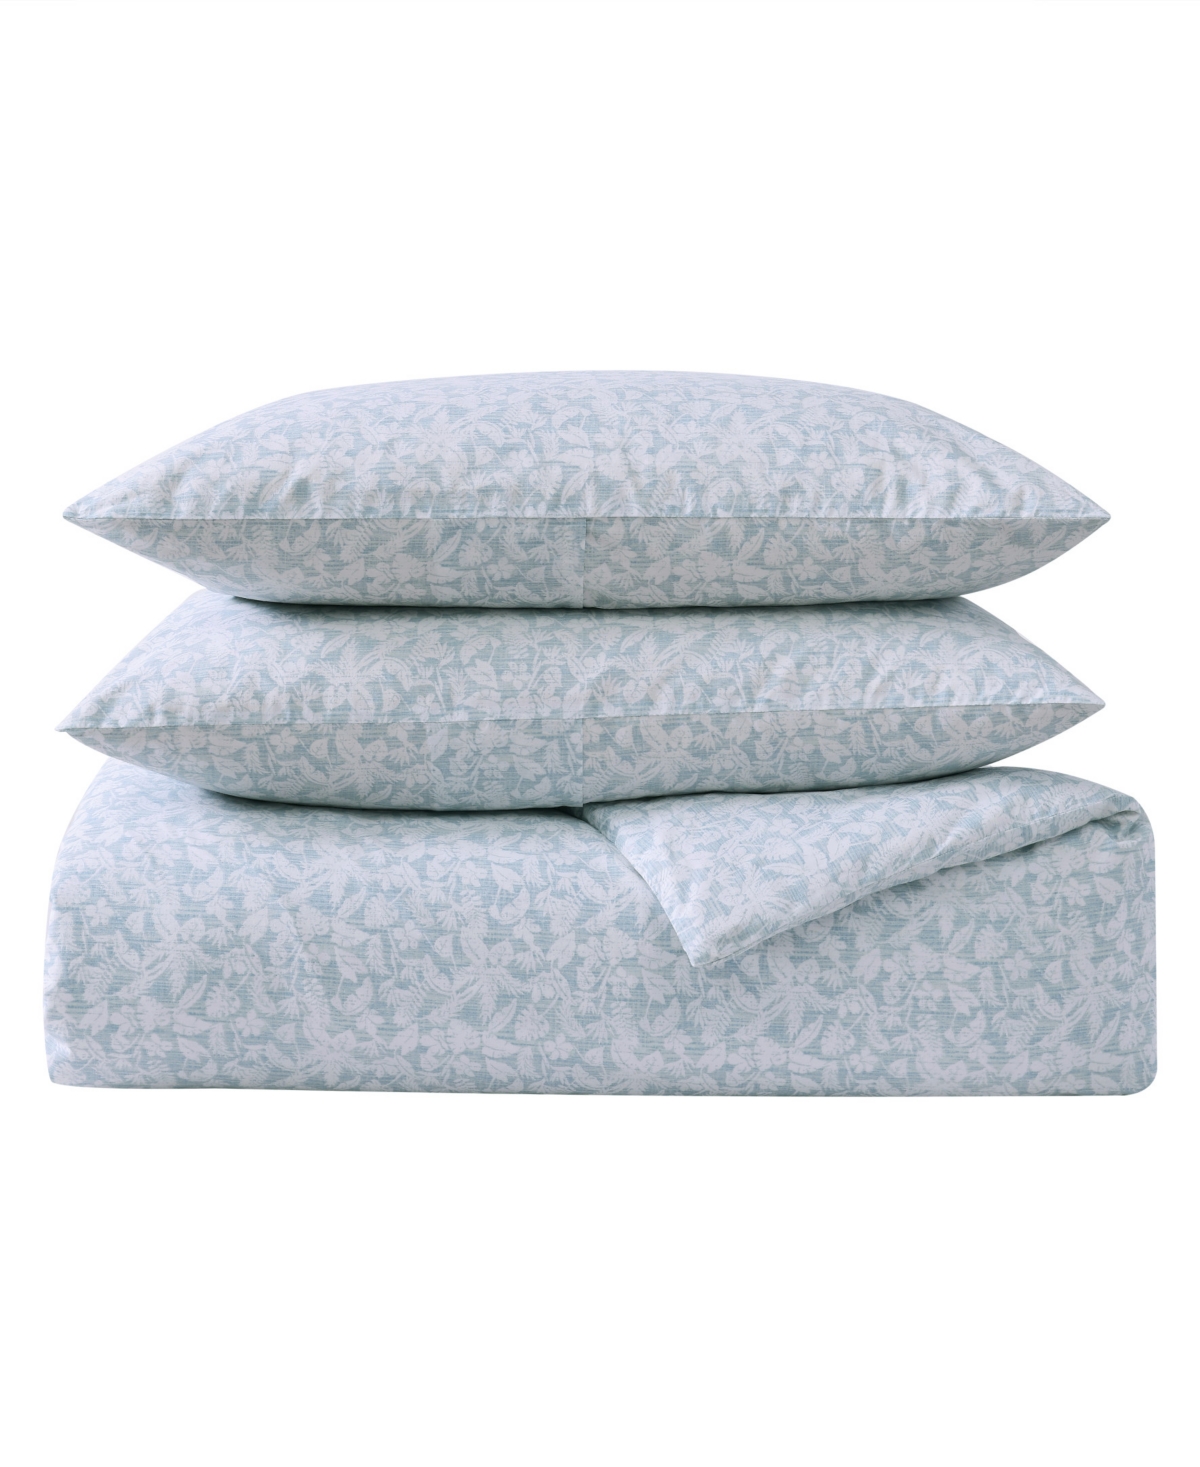 Tommy Bahama Home Koya Bay Cotton 3 Piece Duvet Cover Set, Full/queen In Blue Sky